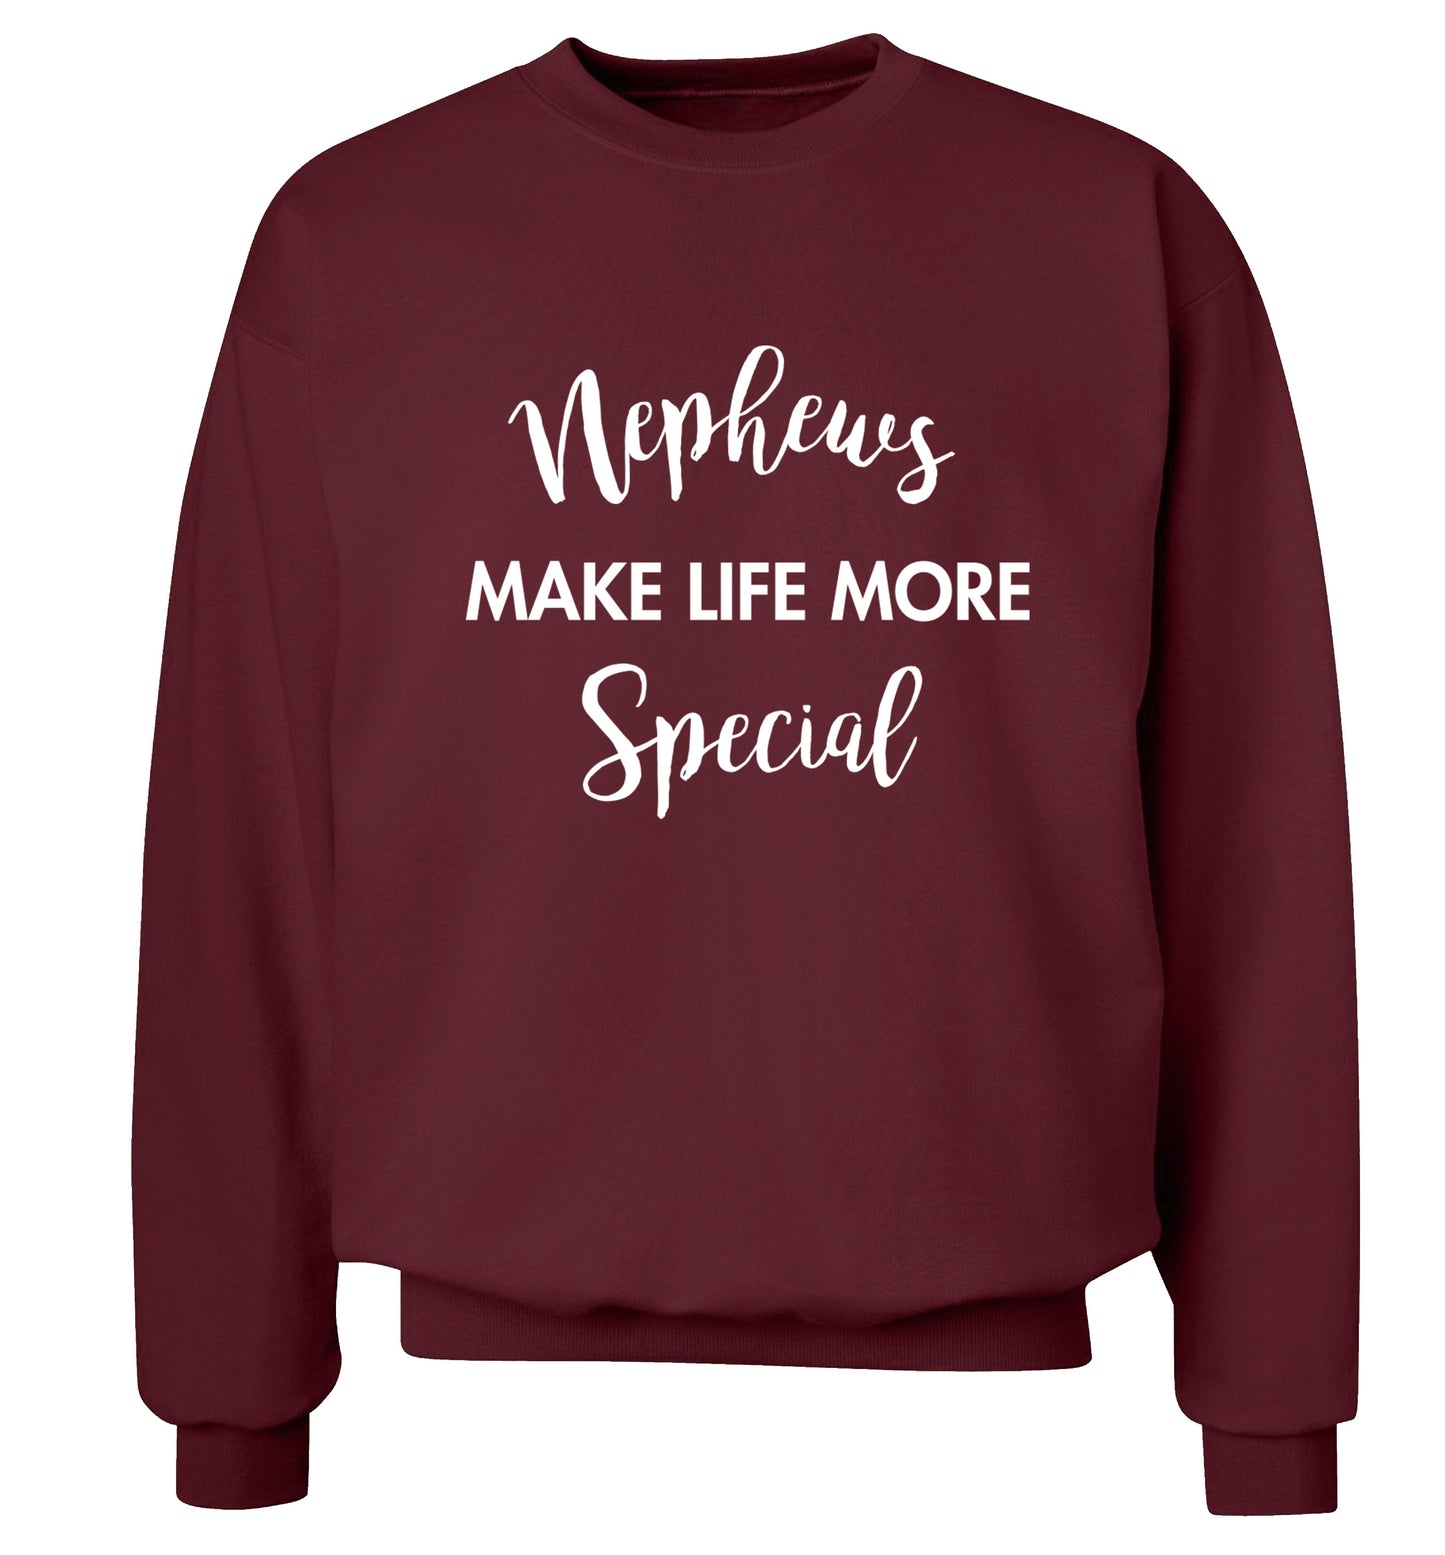 Nephews make life more special Adult's unisex maroon Sweater 2XL